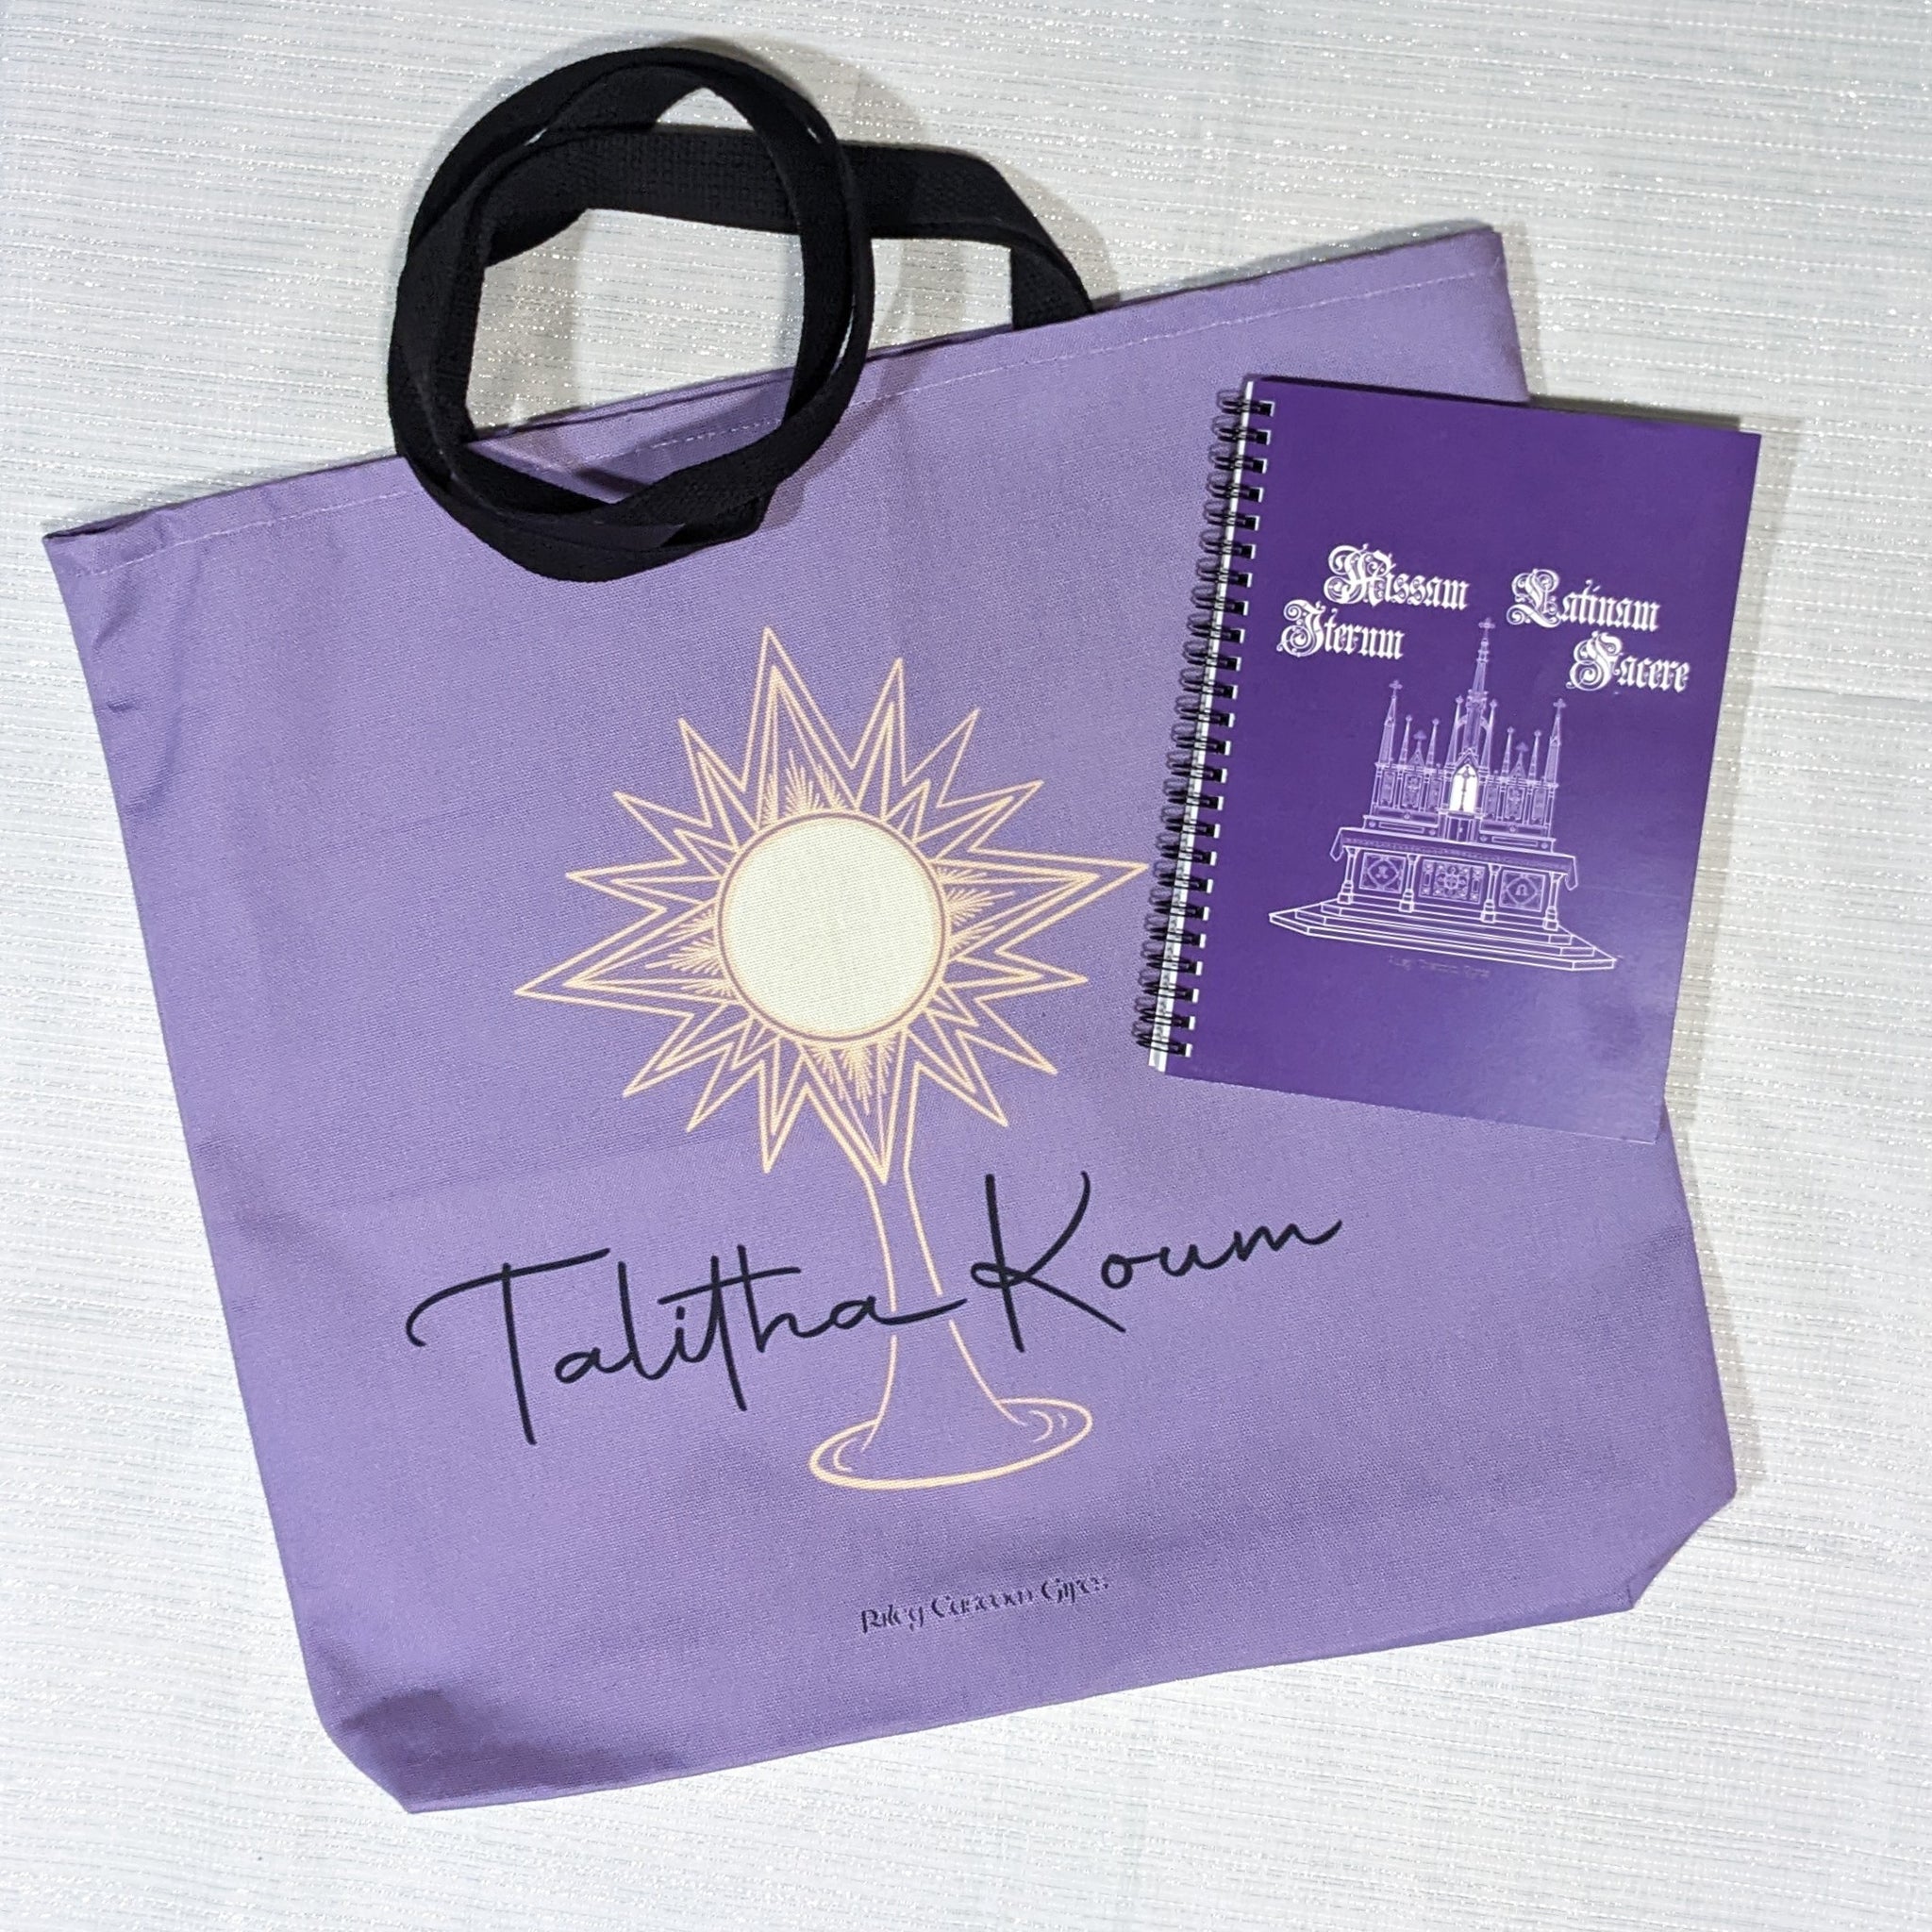 A Catholic tote bag and Catholic notebook, both purple. The tote bag has a monstrance and Talitha Koum on it, and Make Mass Latin Again design on the notebook